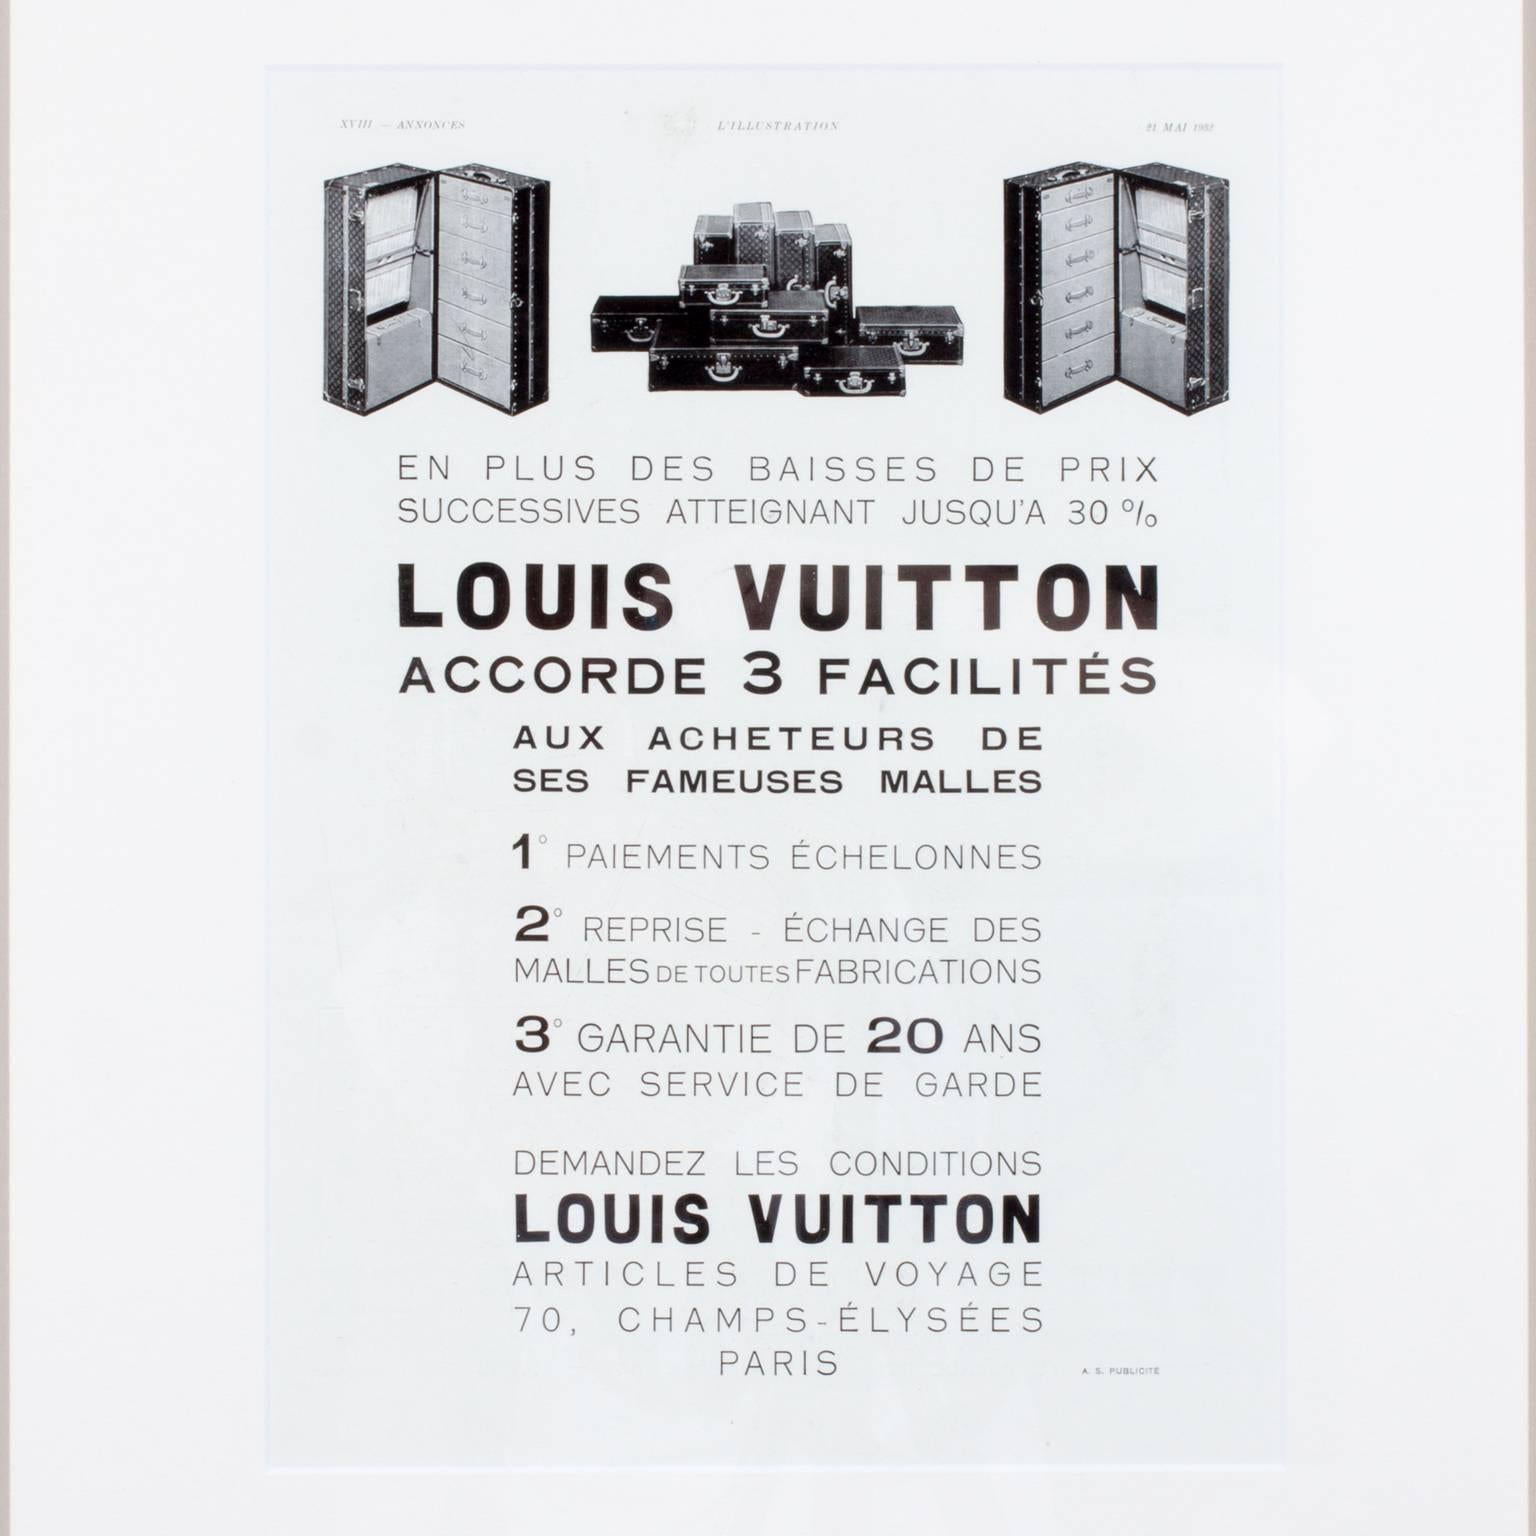 Discovered during our time perusing the Parisian puces markets, this is an original vintage French advertisement from the 1930's. Framed in a subtle Italian gilt frame.  The Louis Vuitton brand is the epitome of French luxury.

New framing.